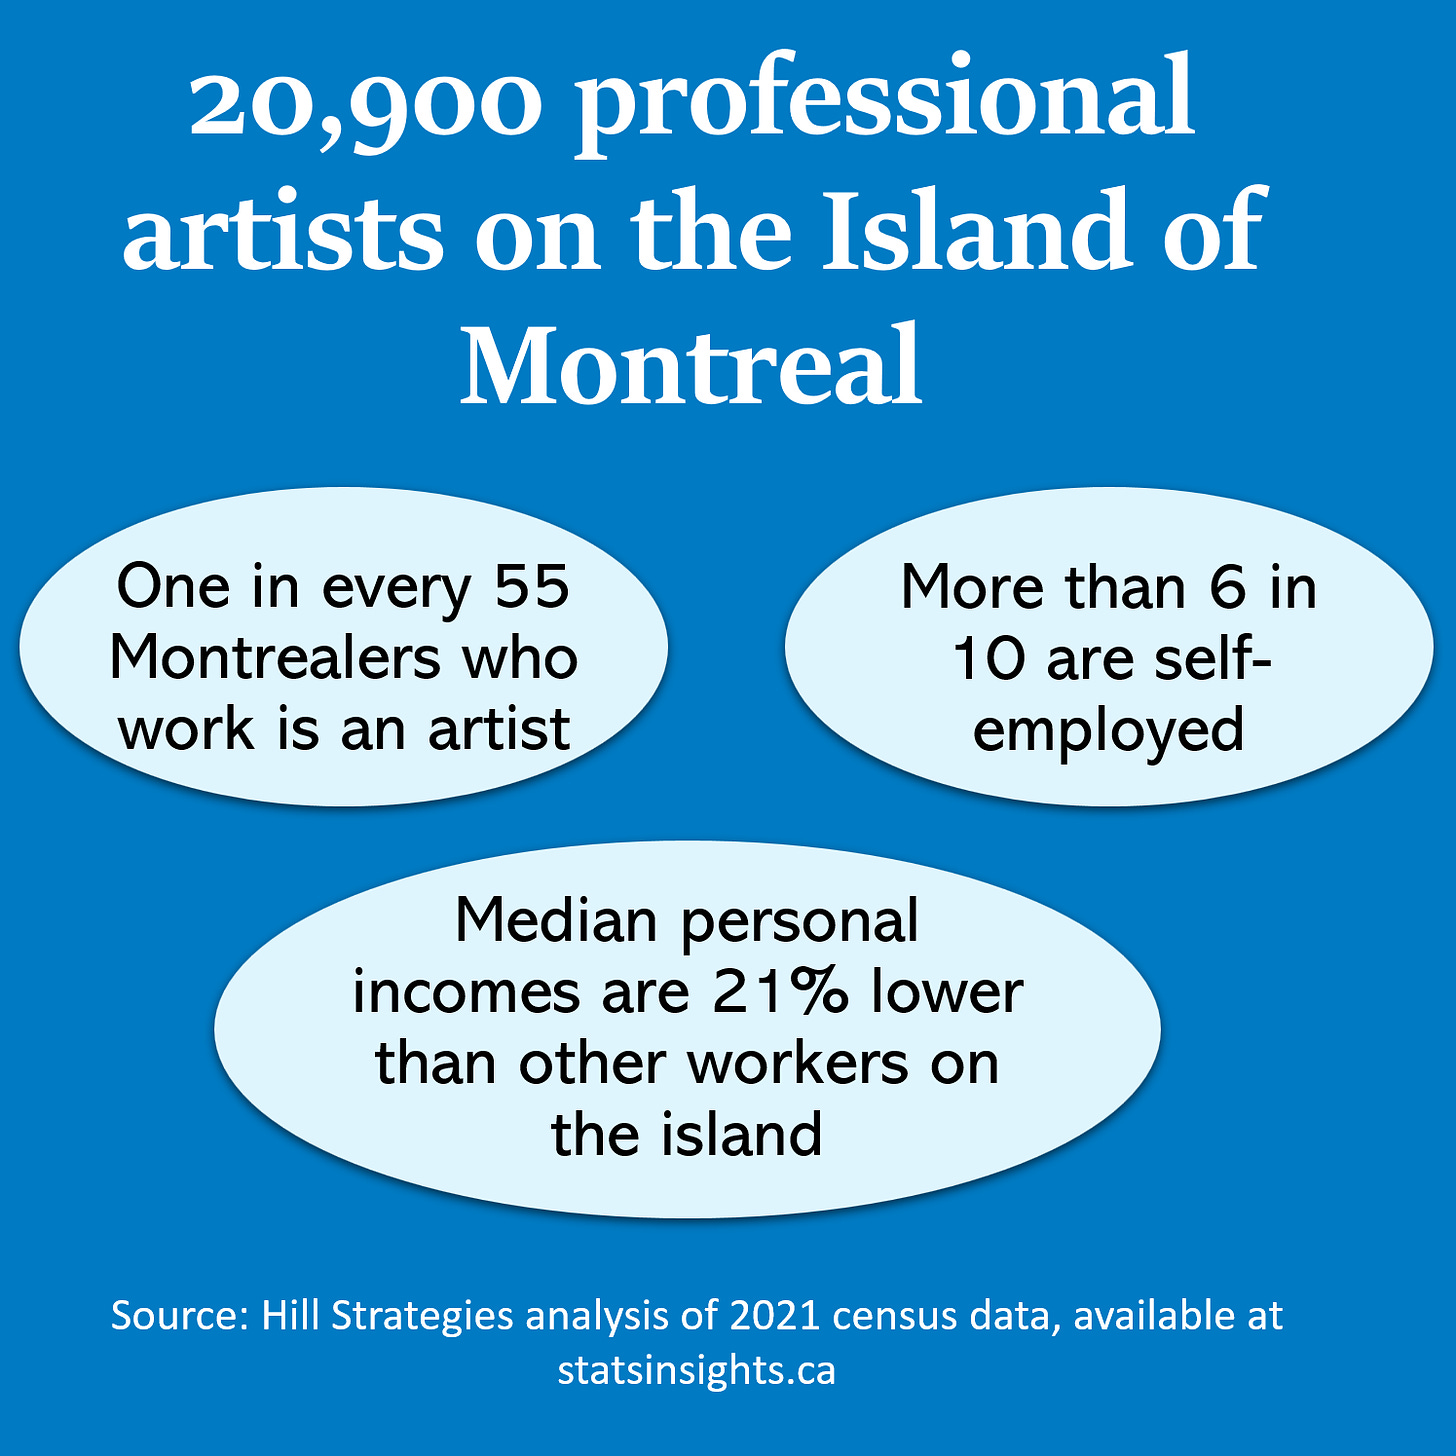 Graphic of key facts about the 20,900 professional artists on the Island of Montreal. 1 in every 55 Montrealers who work is an artist. More than 6 in 10 are self-employed. Median personal incomes are 21% lower than other workers on the Island. Source: Hill Strategies analysis of 2021 census data at http://www.statsinsights.ca.